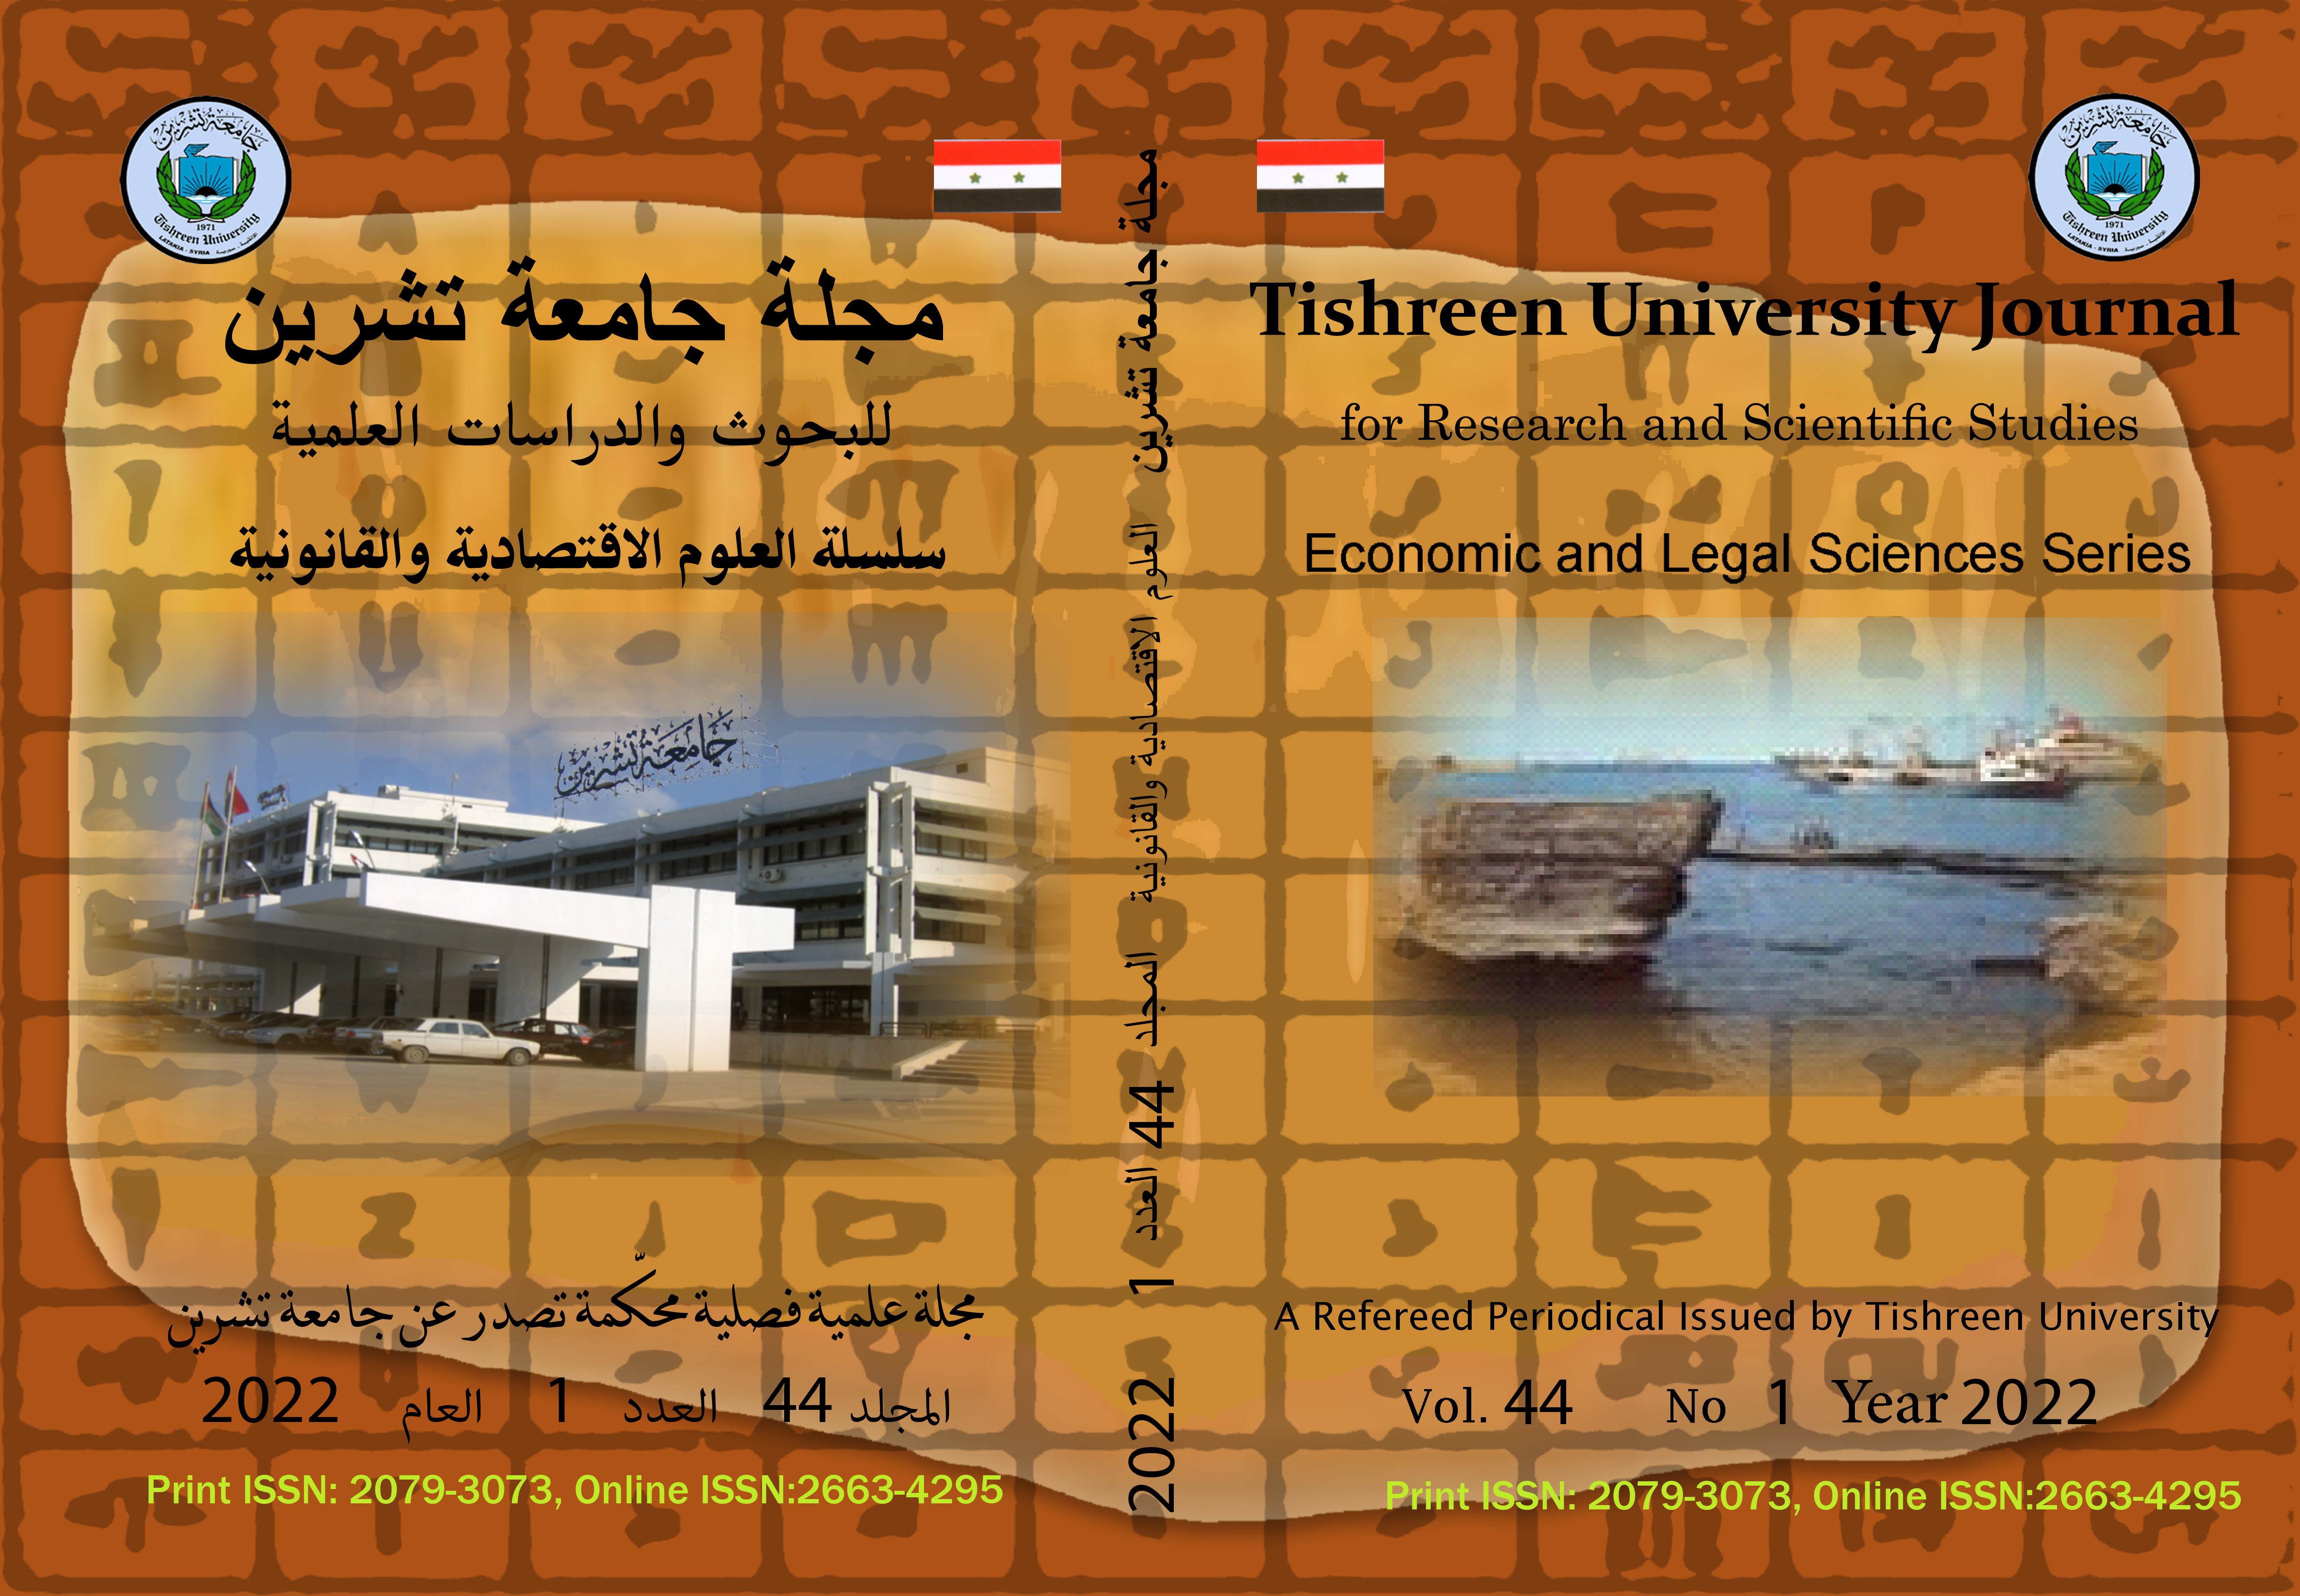 					View Vol. 44 No. 1 (2022): Tishreen University Journal of Research and Scientific Studies - Economic and Legal Sciences
				